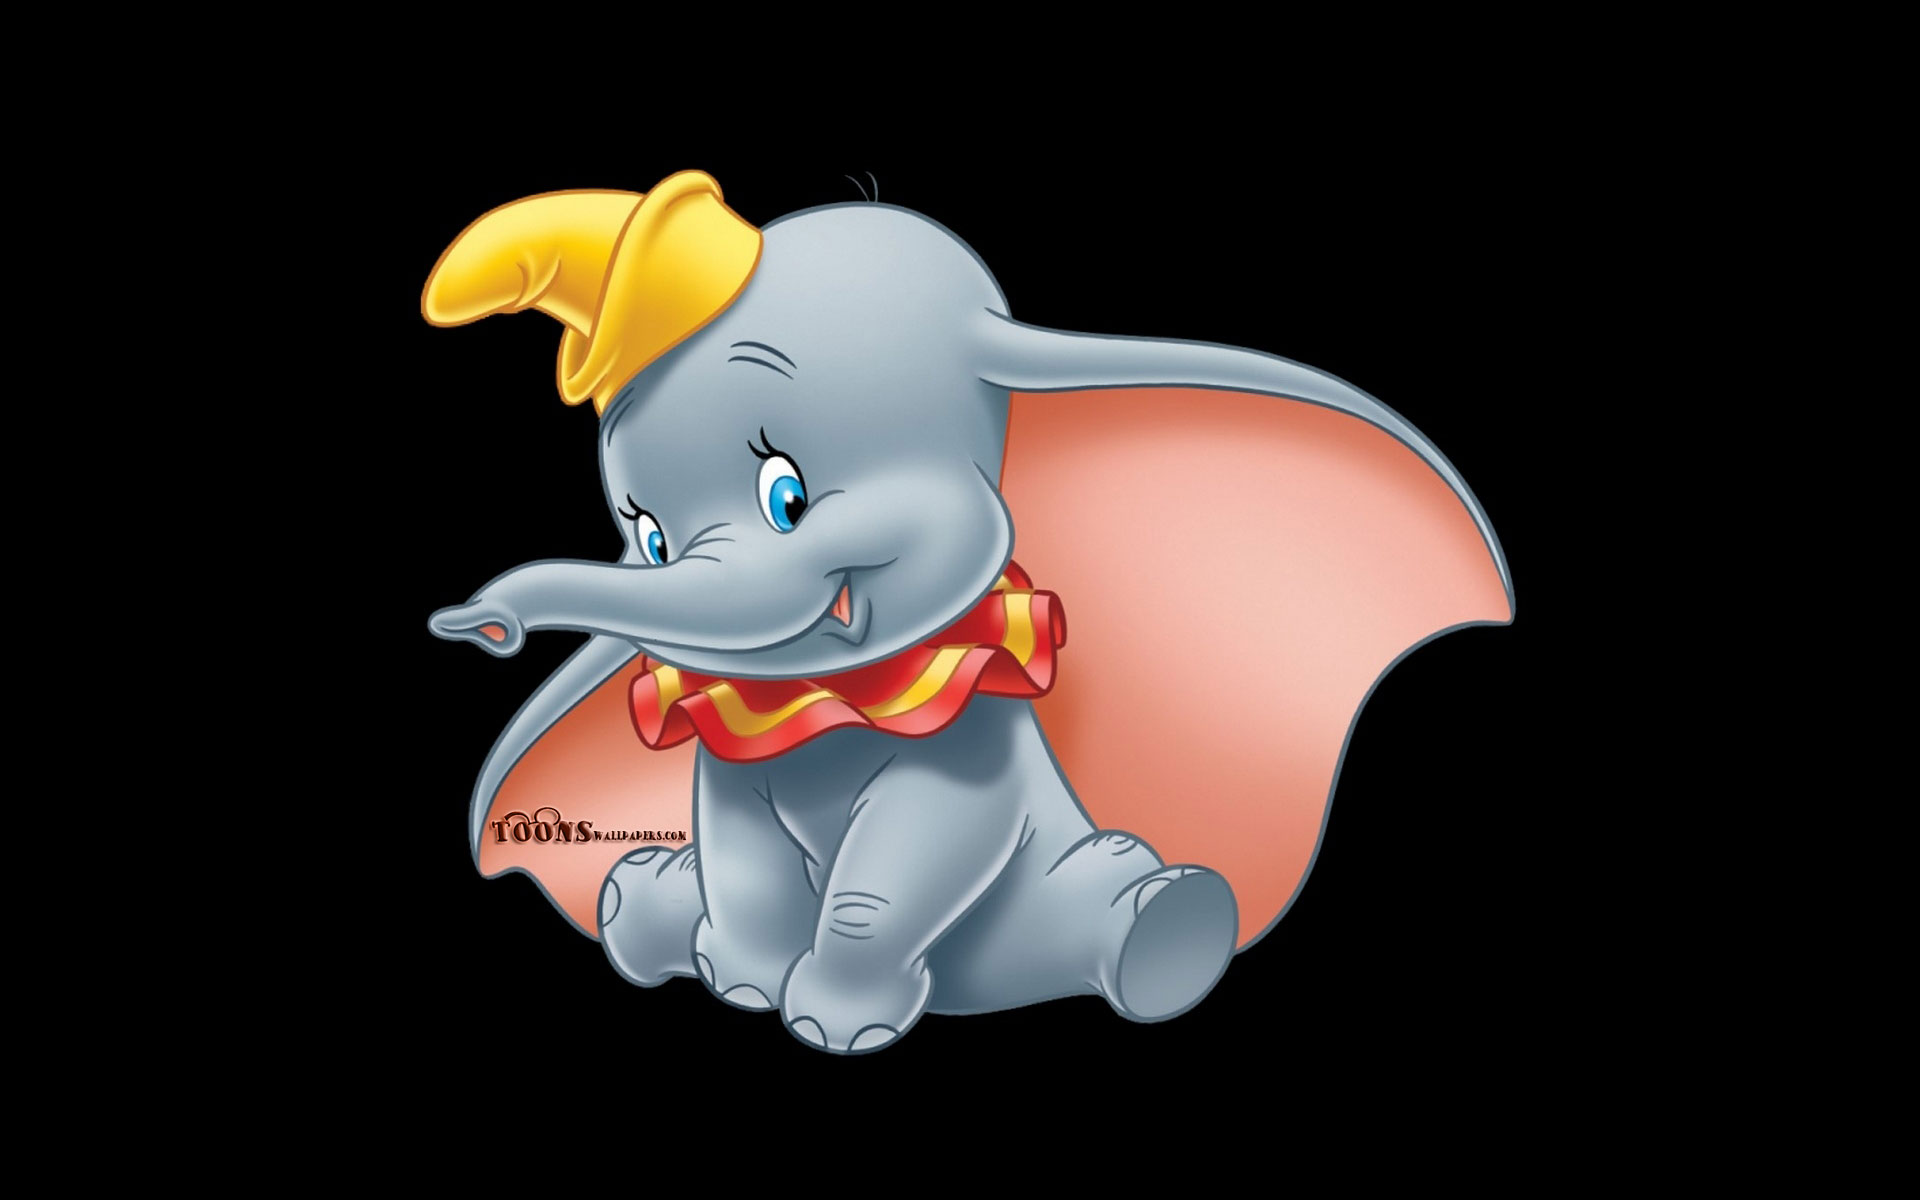 Download Dumbo wallpapers for mobile phone free Dumbo HD pictures